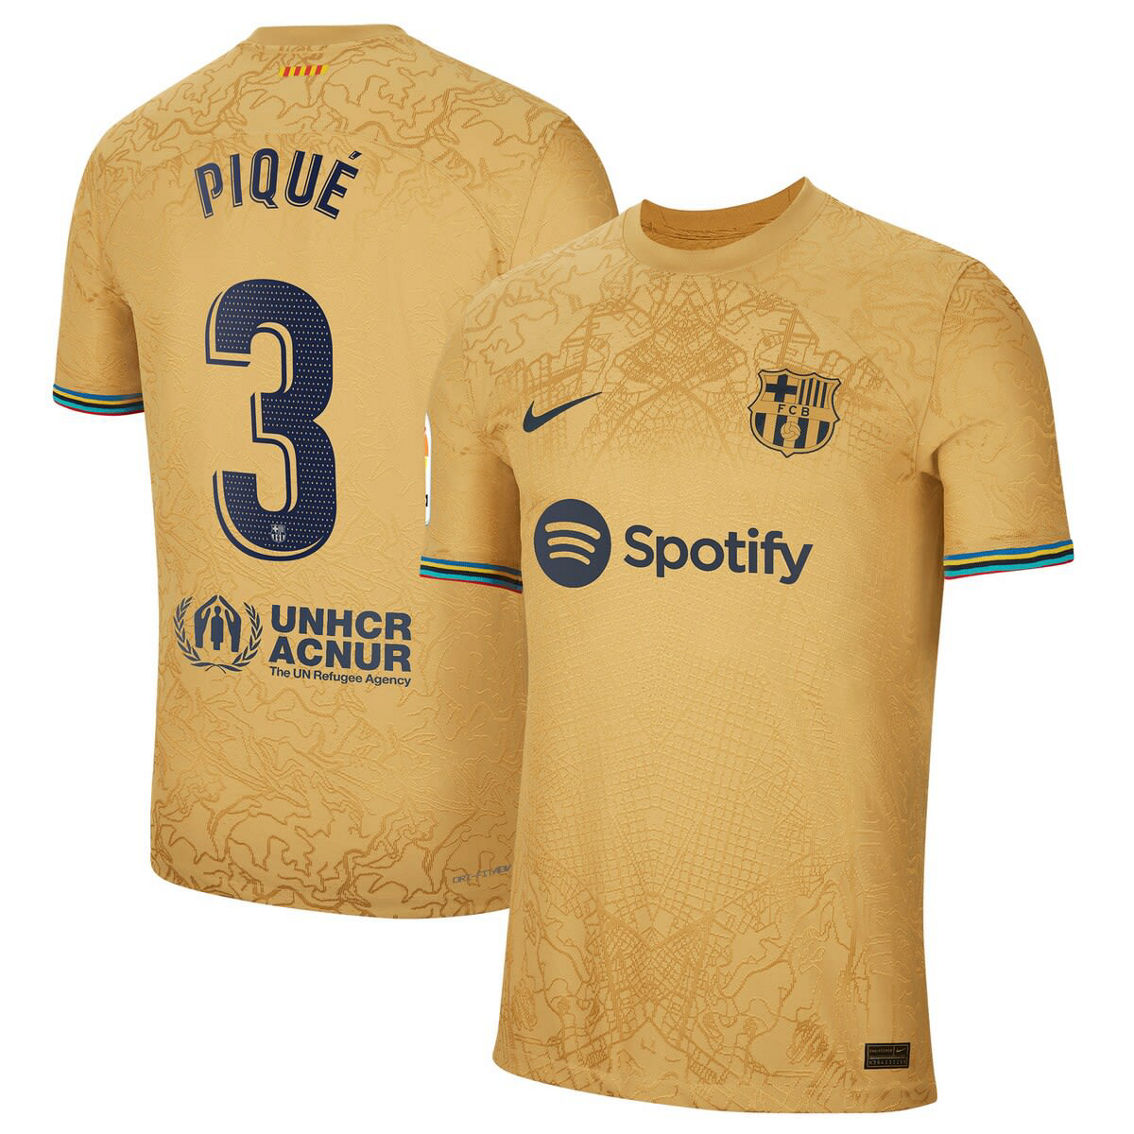 Nike Men's Gerard Pique Gold Barcelona 2022/23 Away Authentic Player Jersey - Image 2 of 4